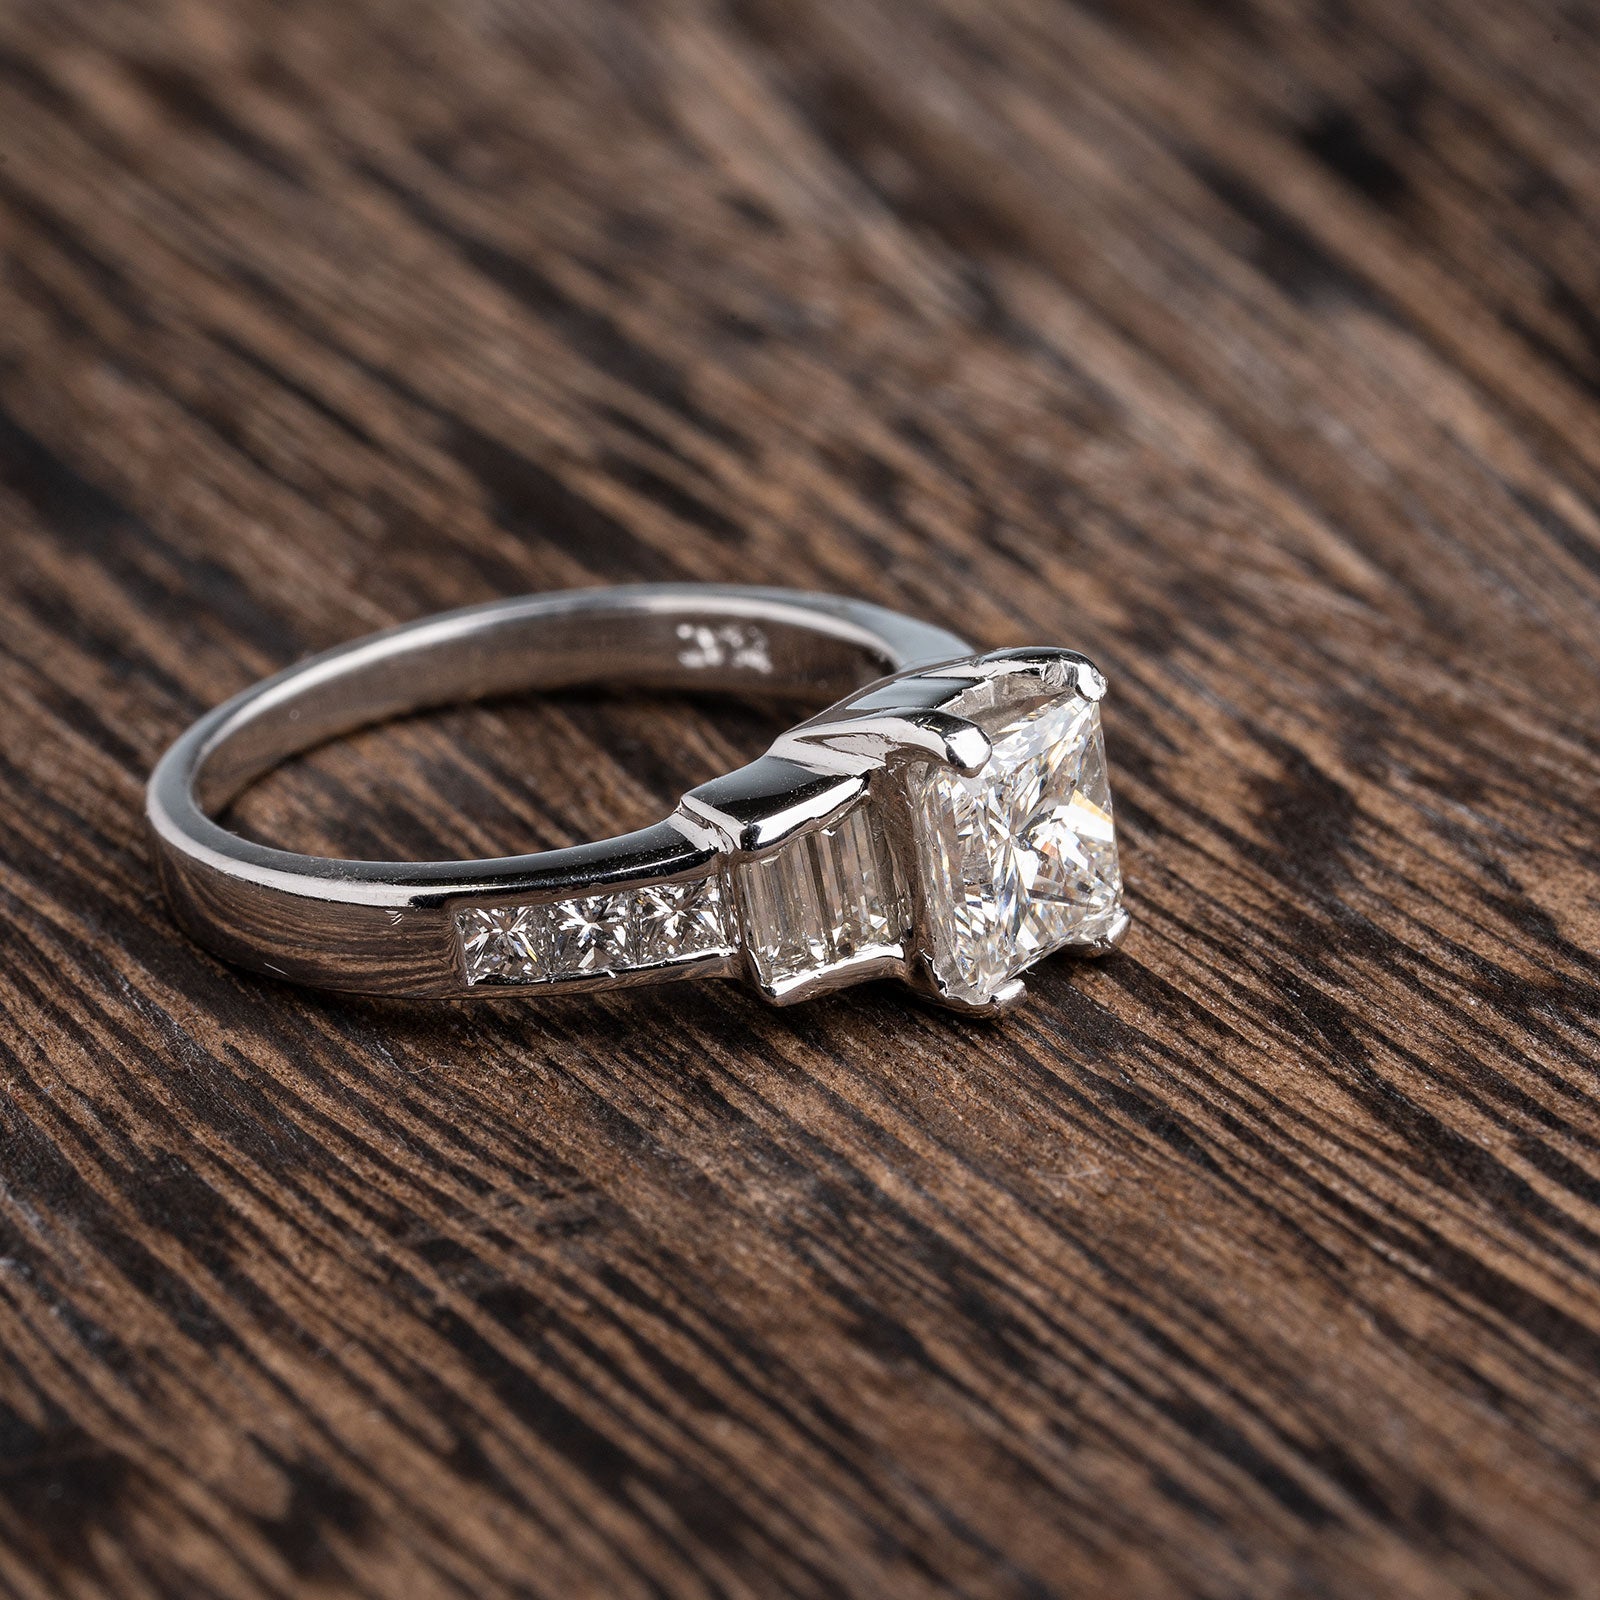 Buy Princess Cut Diamond Engagement Ring, Princess Cut Solitaire Ring,  Princess Solitaire Ring Diamond 0.96 Carats Online in India - Etsy